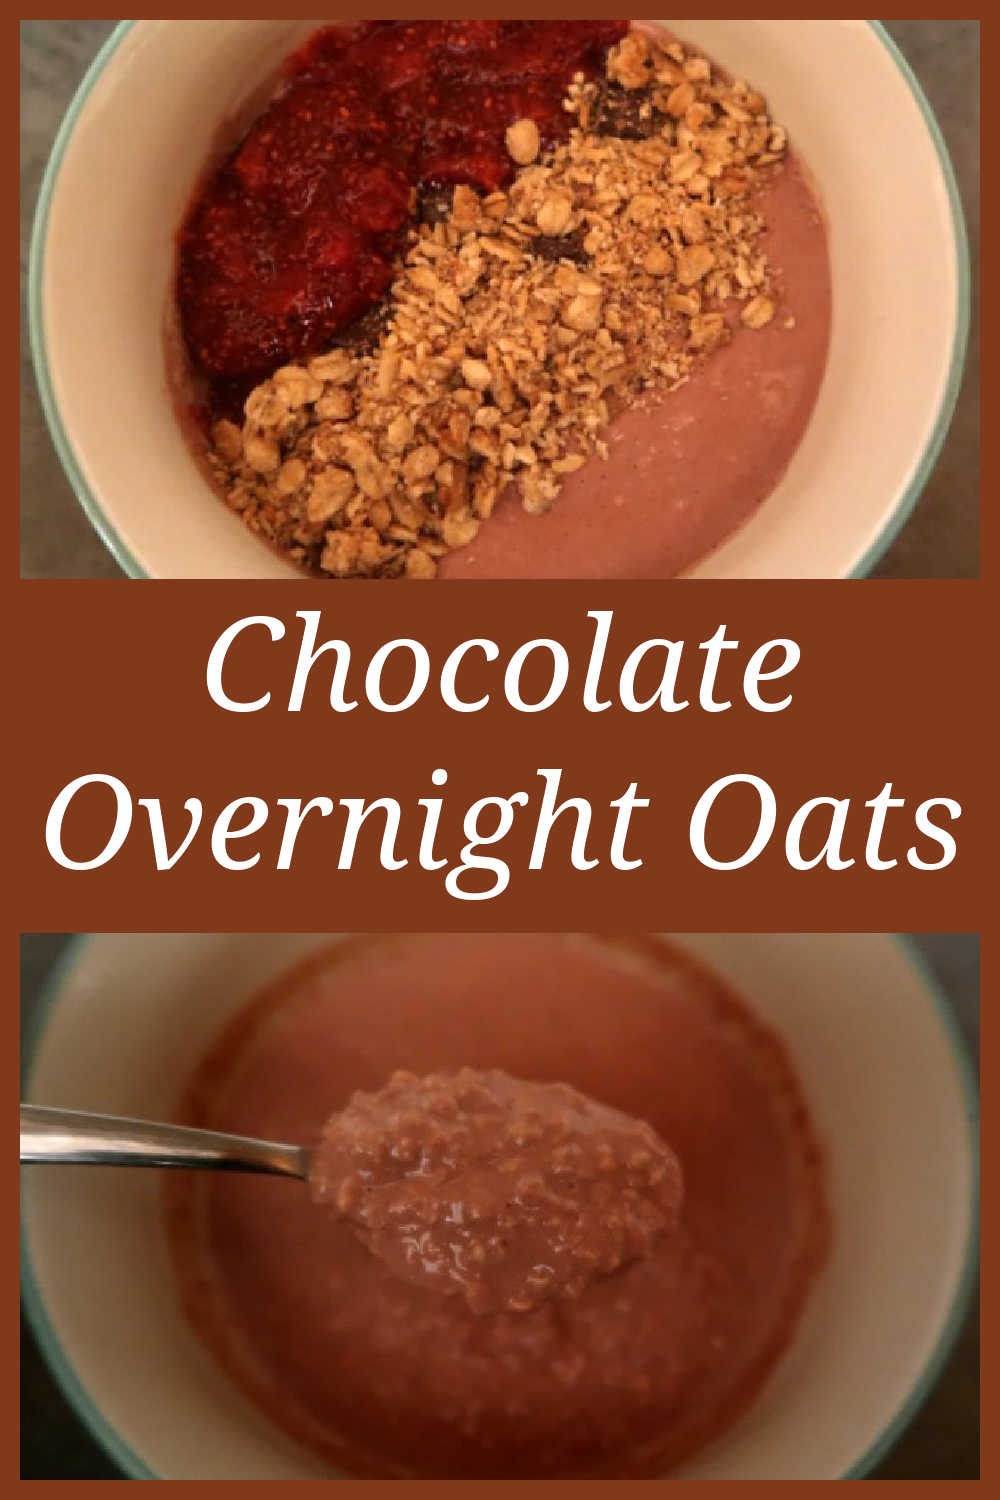 Chocolate Overnight Oats Recipe - How to make a decadent easy and healthy overnight oat breakfast bowl with milk & yogurt - Cheap Breakfast Recipes.